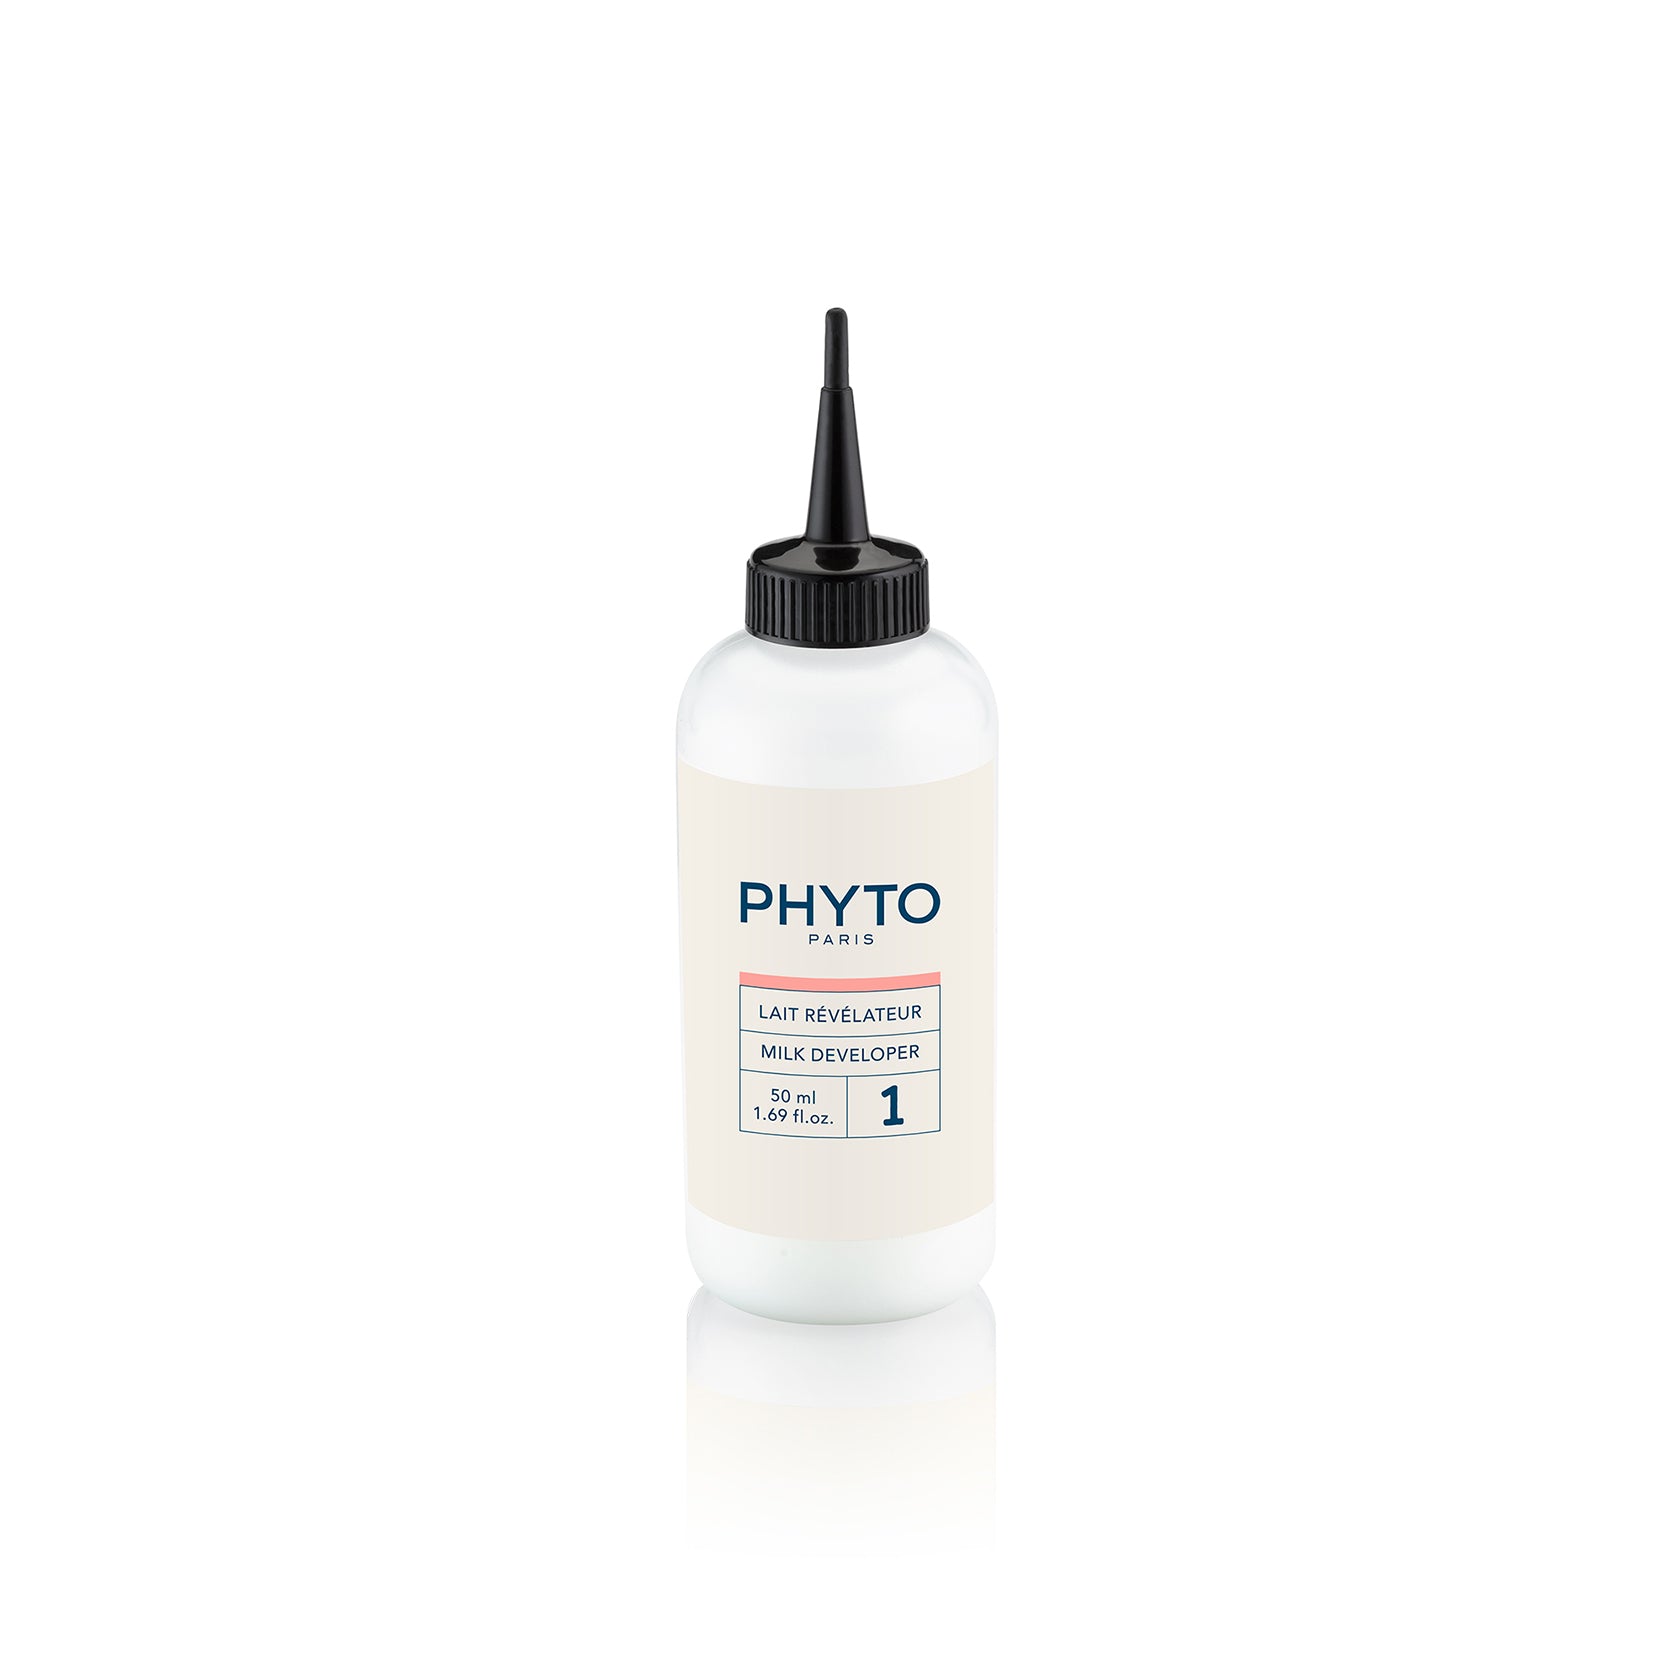 Phytocolor Permanent Color Shade 10 Extra Light Blonde